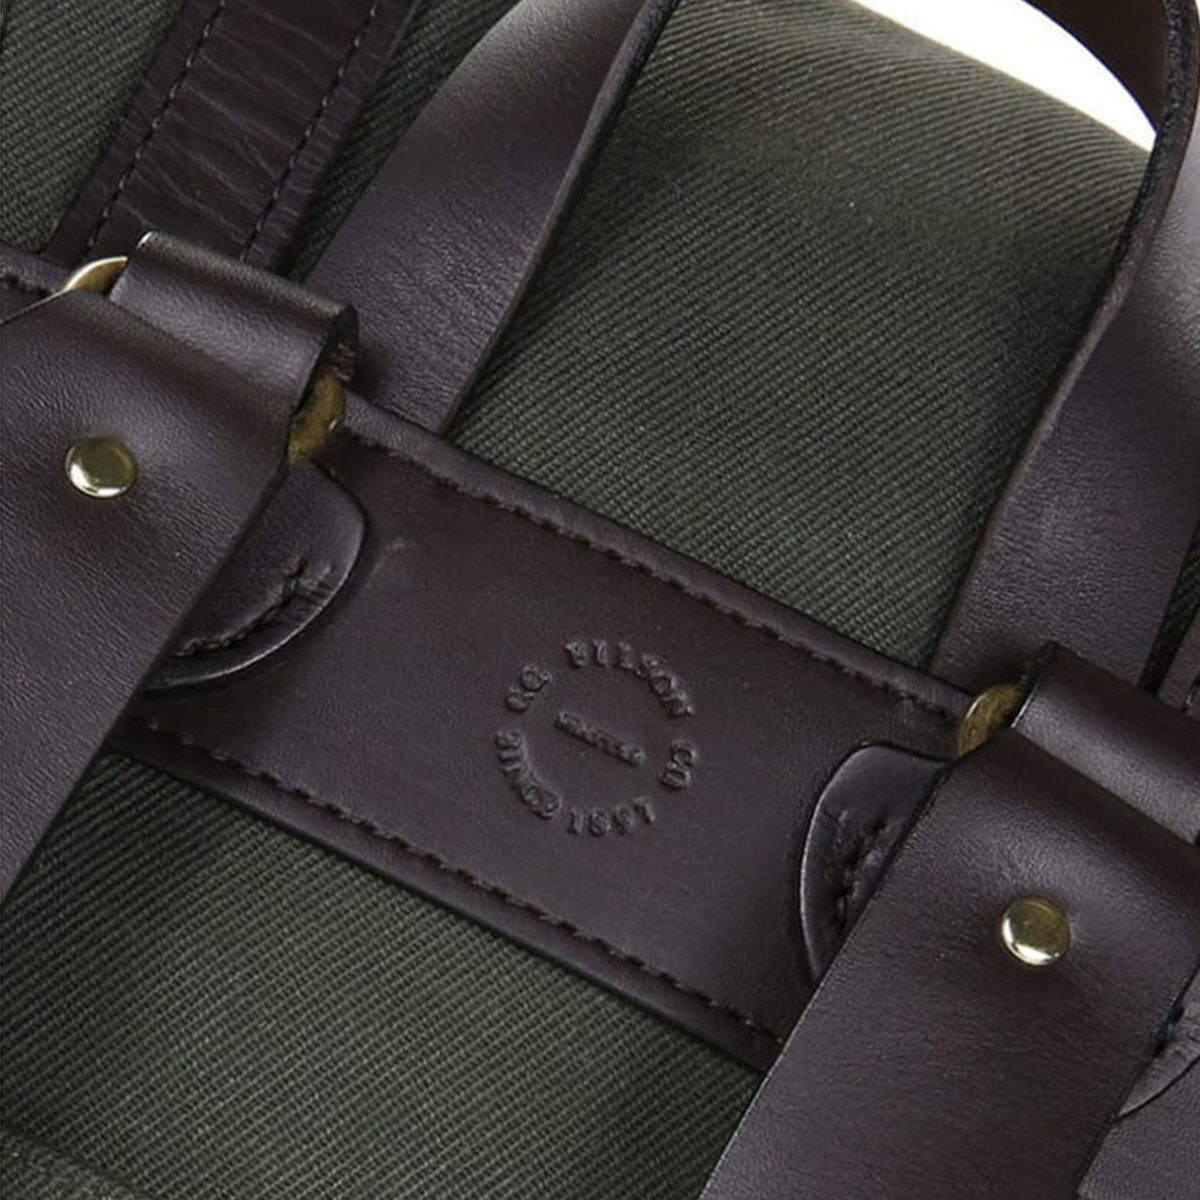 Filson Rugged Twill Large Rucksack Otter Green, the perfect backpack for every trip you make